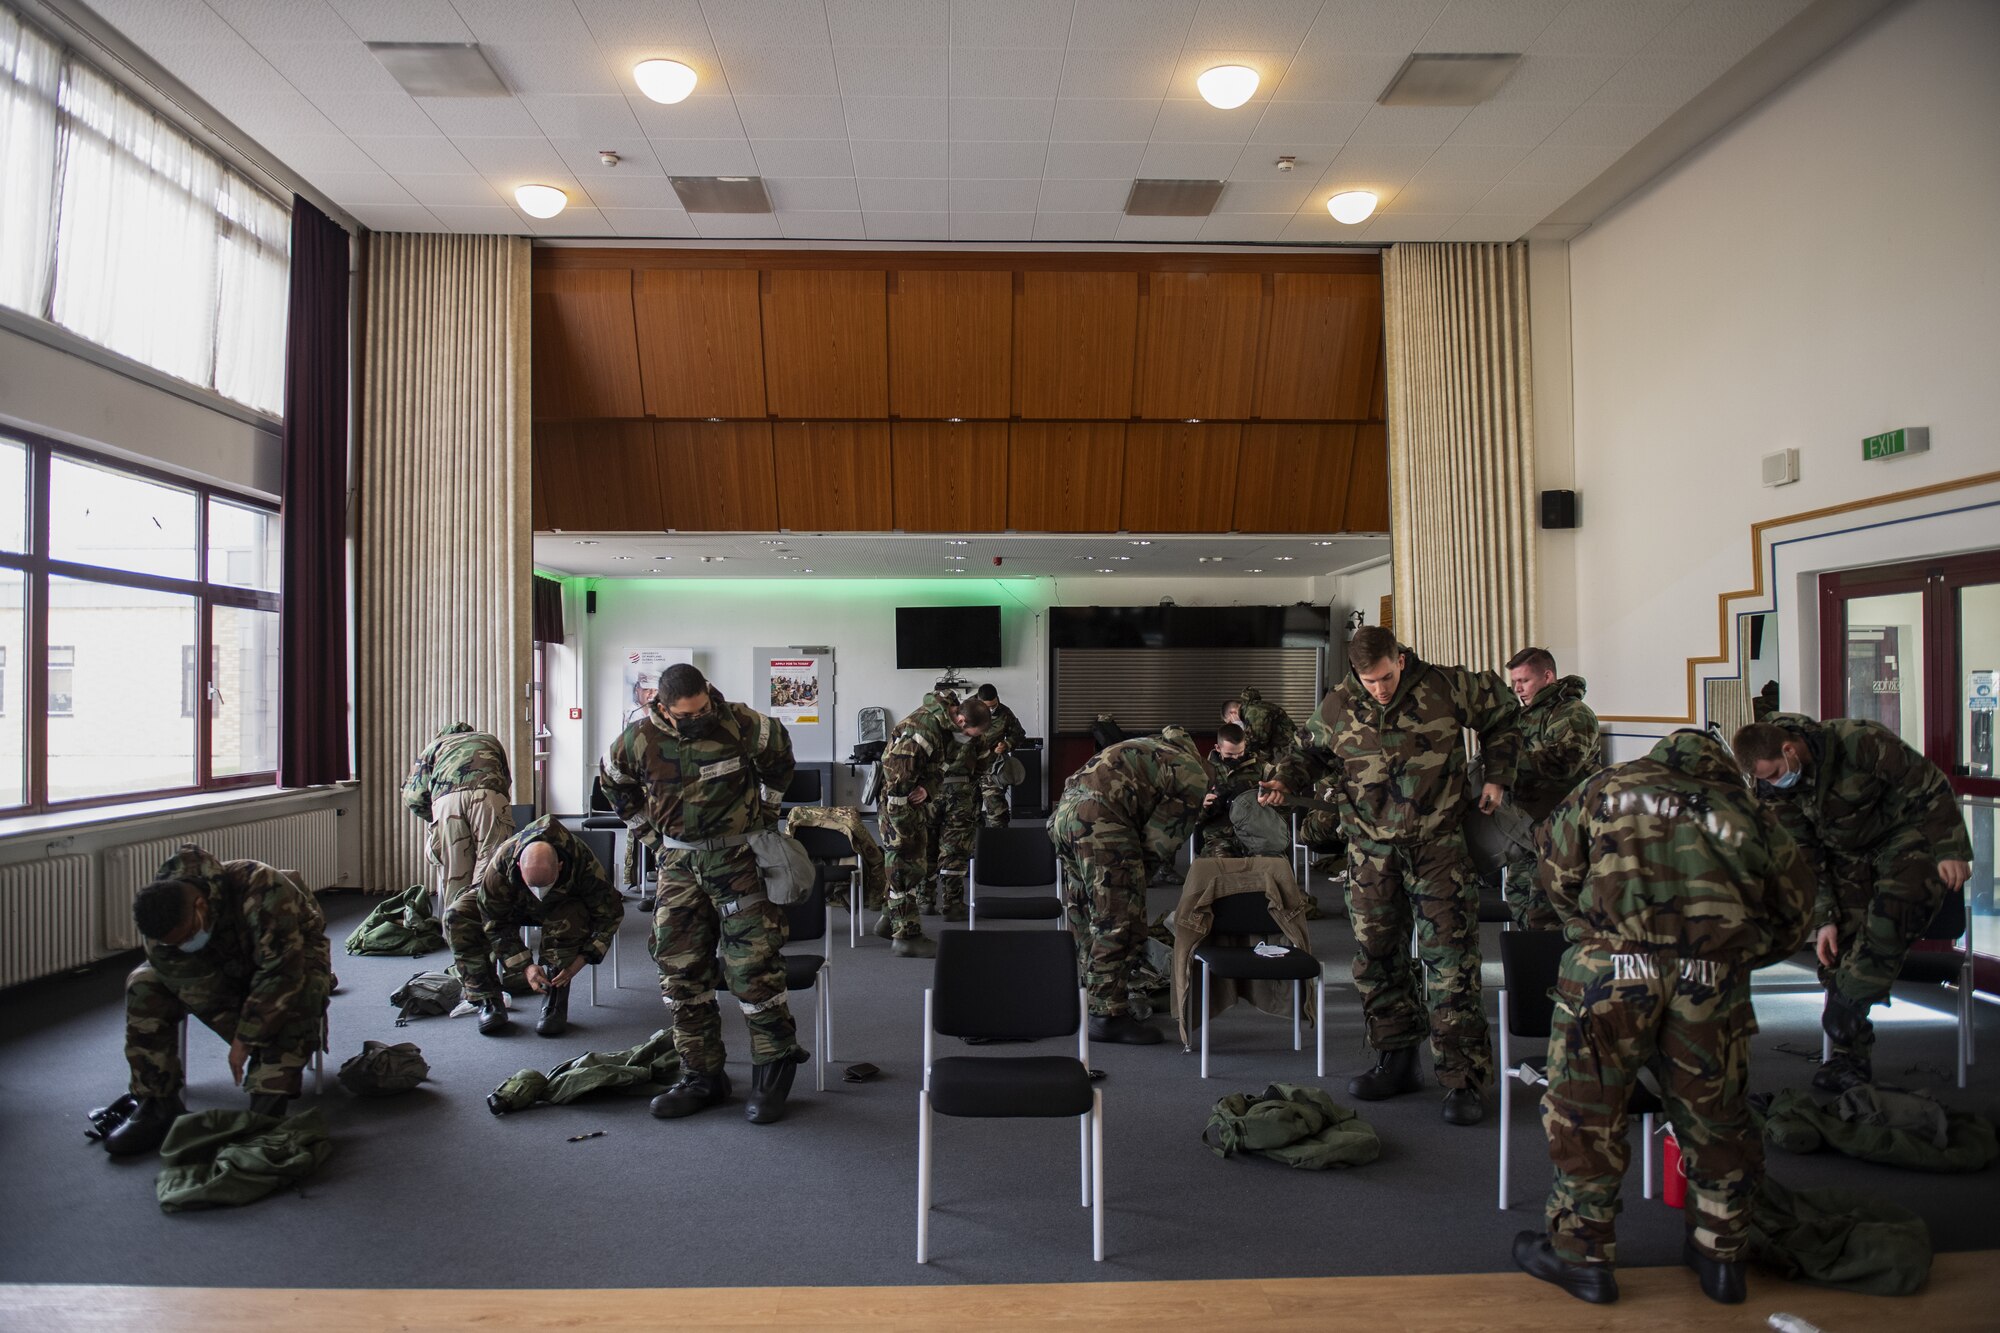 U.S. Air Force Airmen from the 702nd Munitions Support Squadron don their Mission Oriented Protective Posture gear during a chemical, biological, radiological and nuclear response training course at the 702nd MUNSS, April 13, 2021. Donning MOPP gear is an essential part of the course and must be done within a specific time frame to ensure members are protected from any potential CBRN attacks. (U.S. Air Force photo by Senior Airman Ali Stewart)